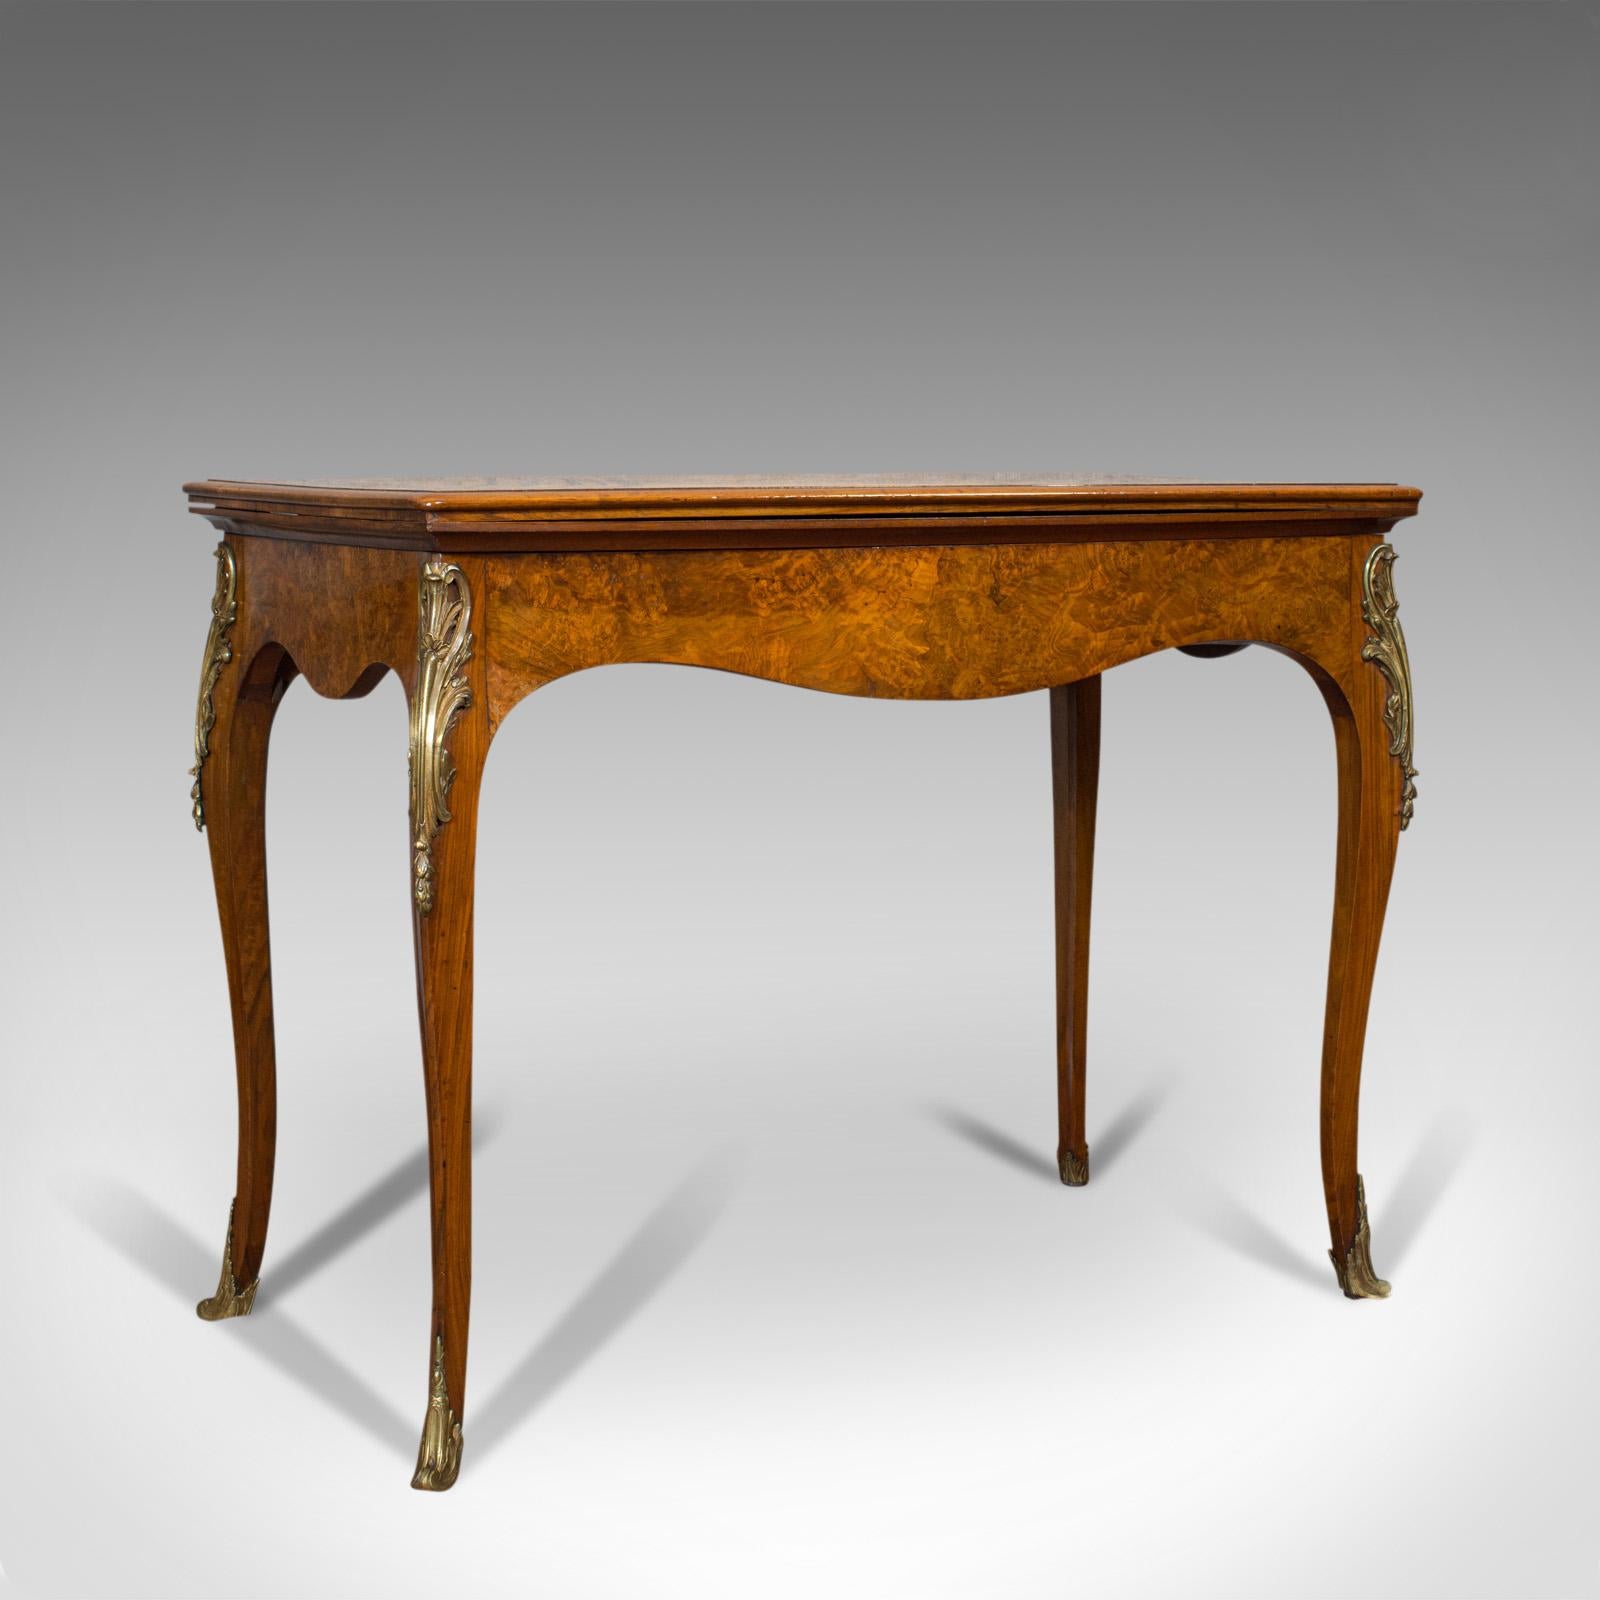 This is an antique card table. A French, burr walnut fold-over games table, dating to the Victorian period, circa 1870.

Highly appealing, rare antique gaming table
Displays a desirable aged patina
Exquisite burr walnut shows fine grain